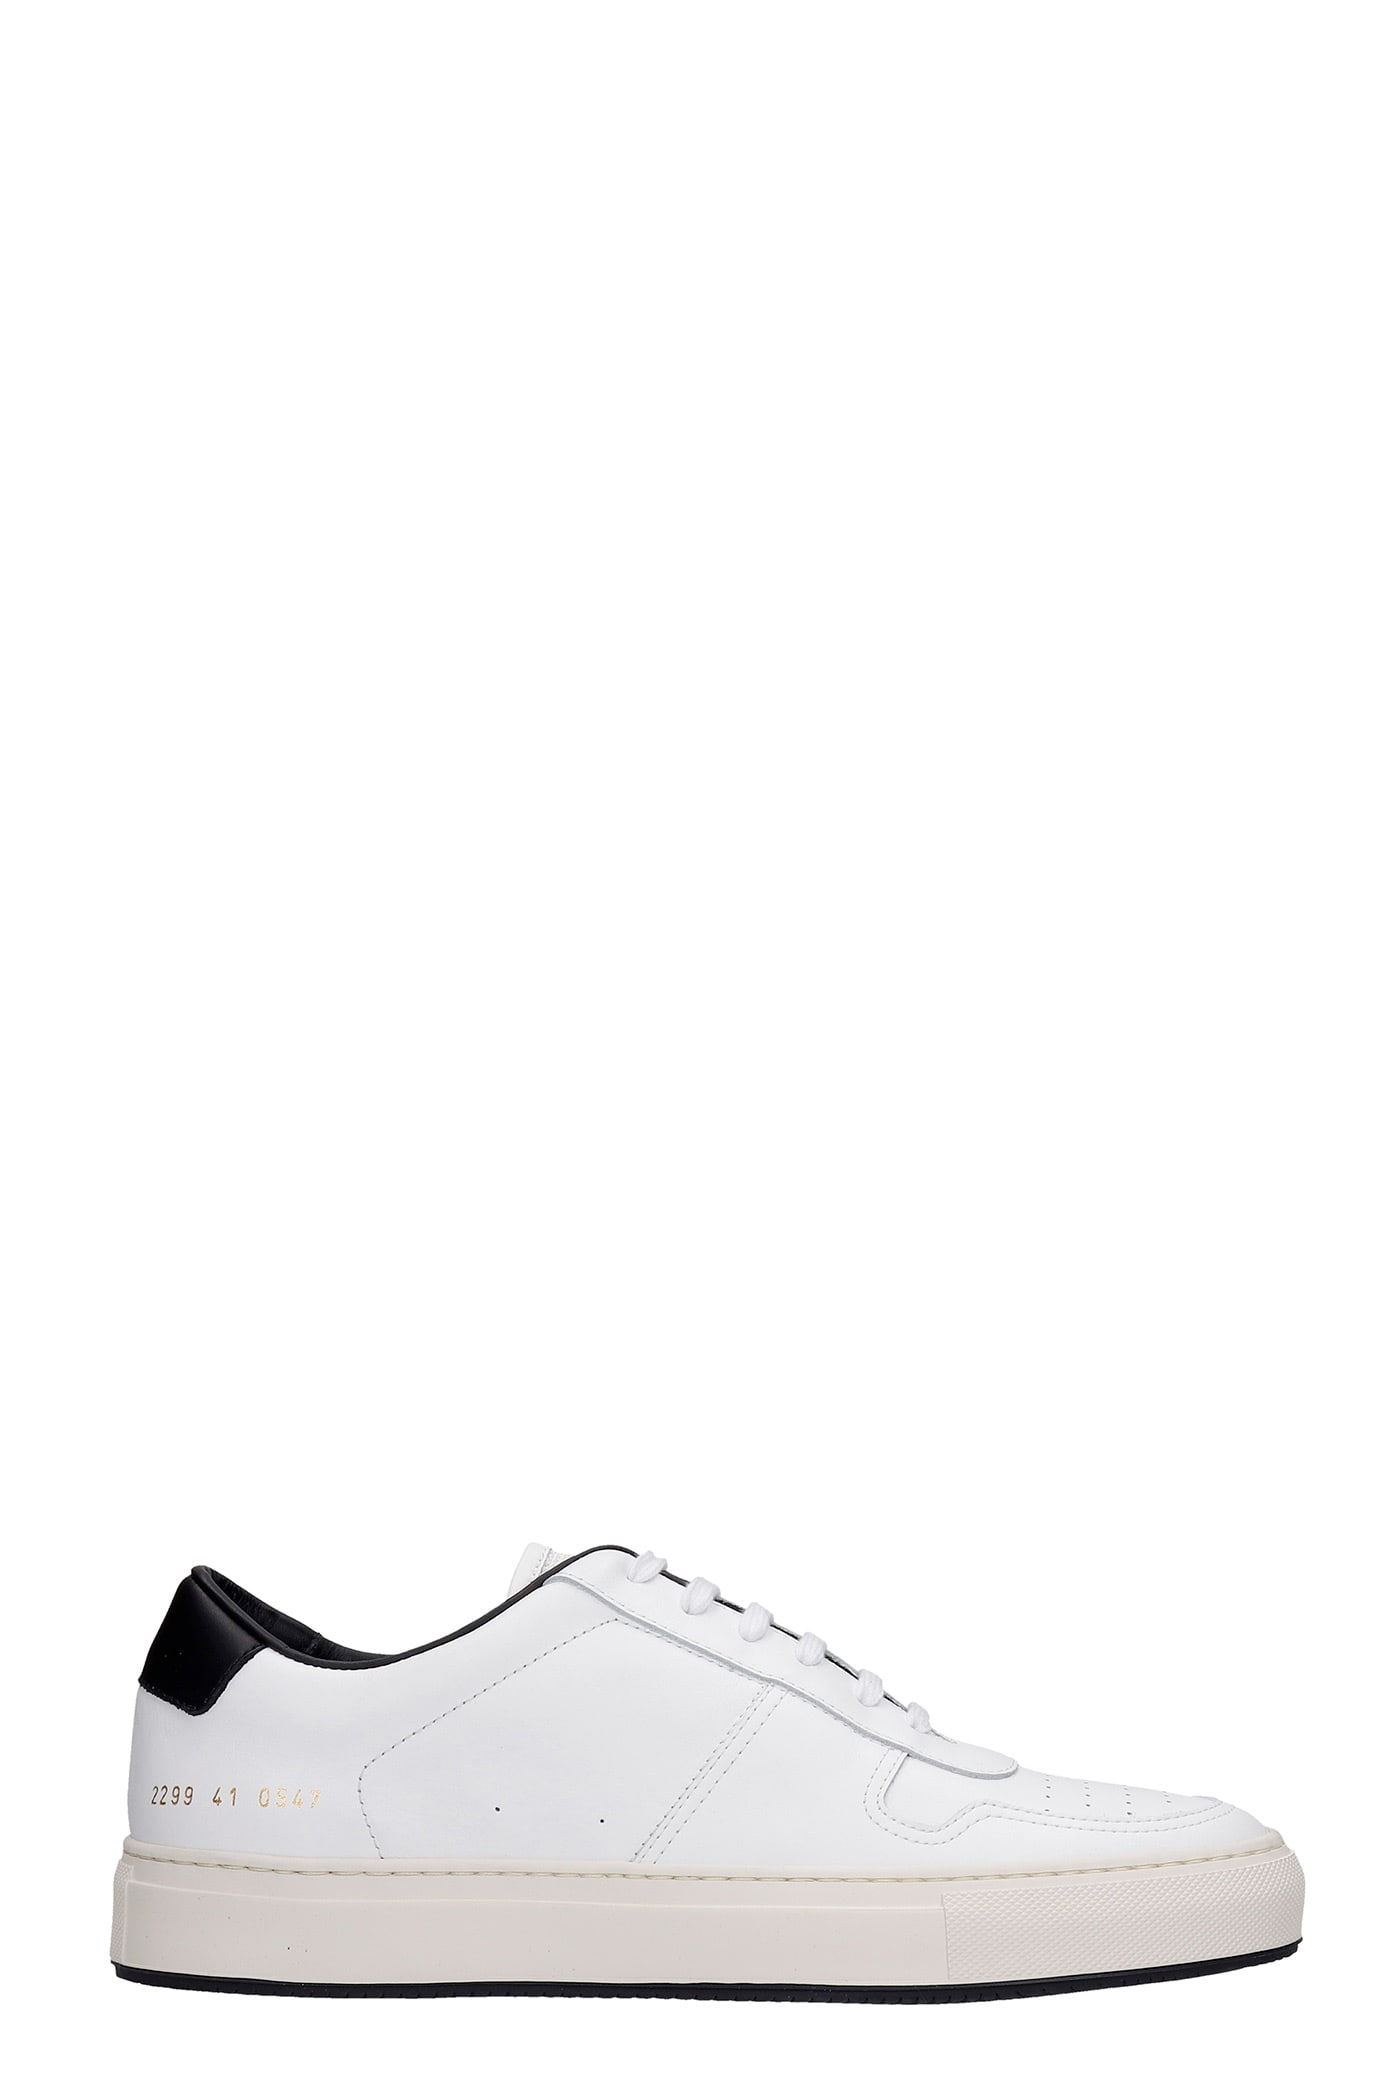 Common Projects B-ball 90 Sneakers In White Leather